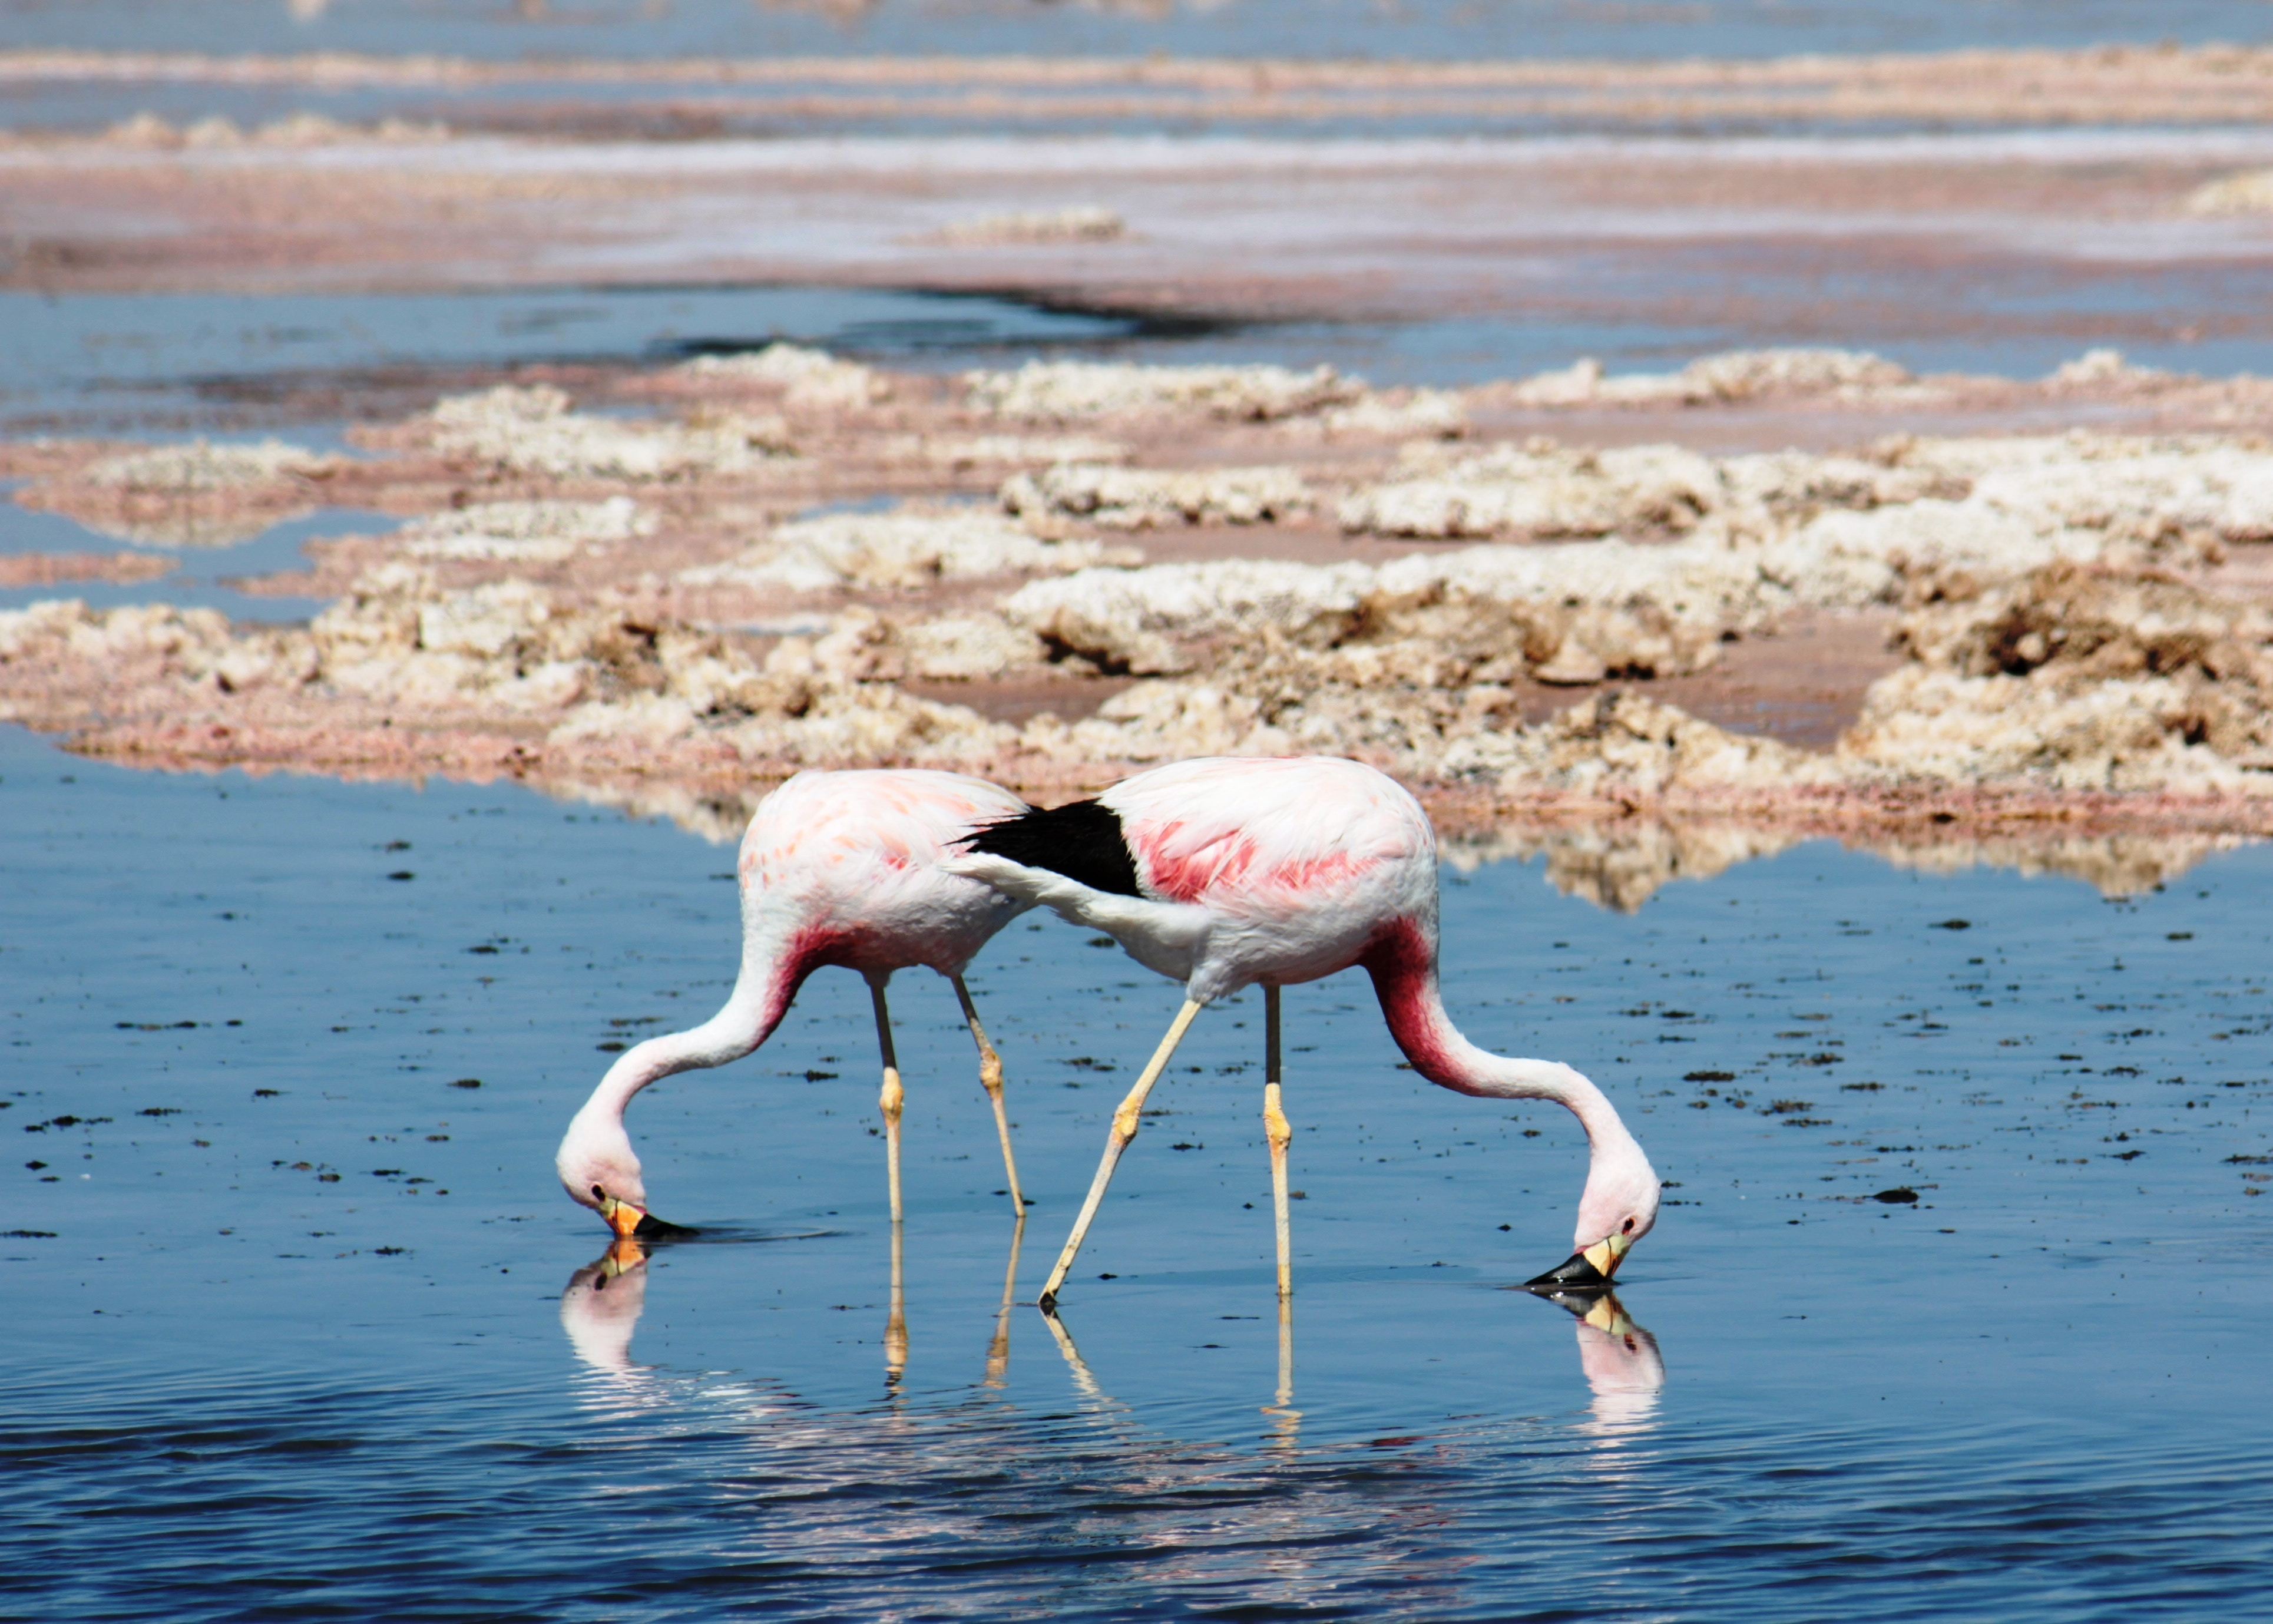 Two flamingos drink from a pool of water in the Atacama Desert.